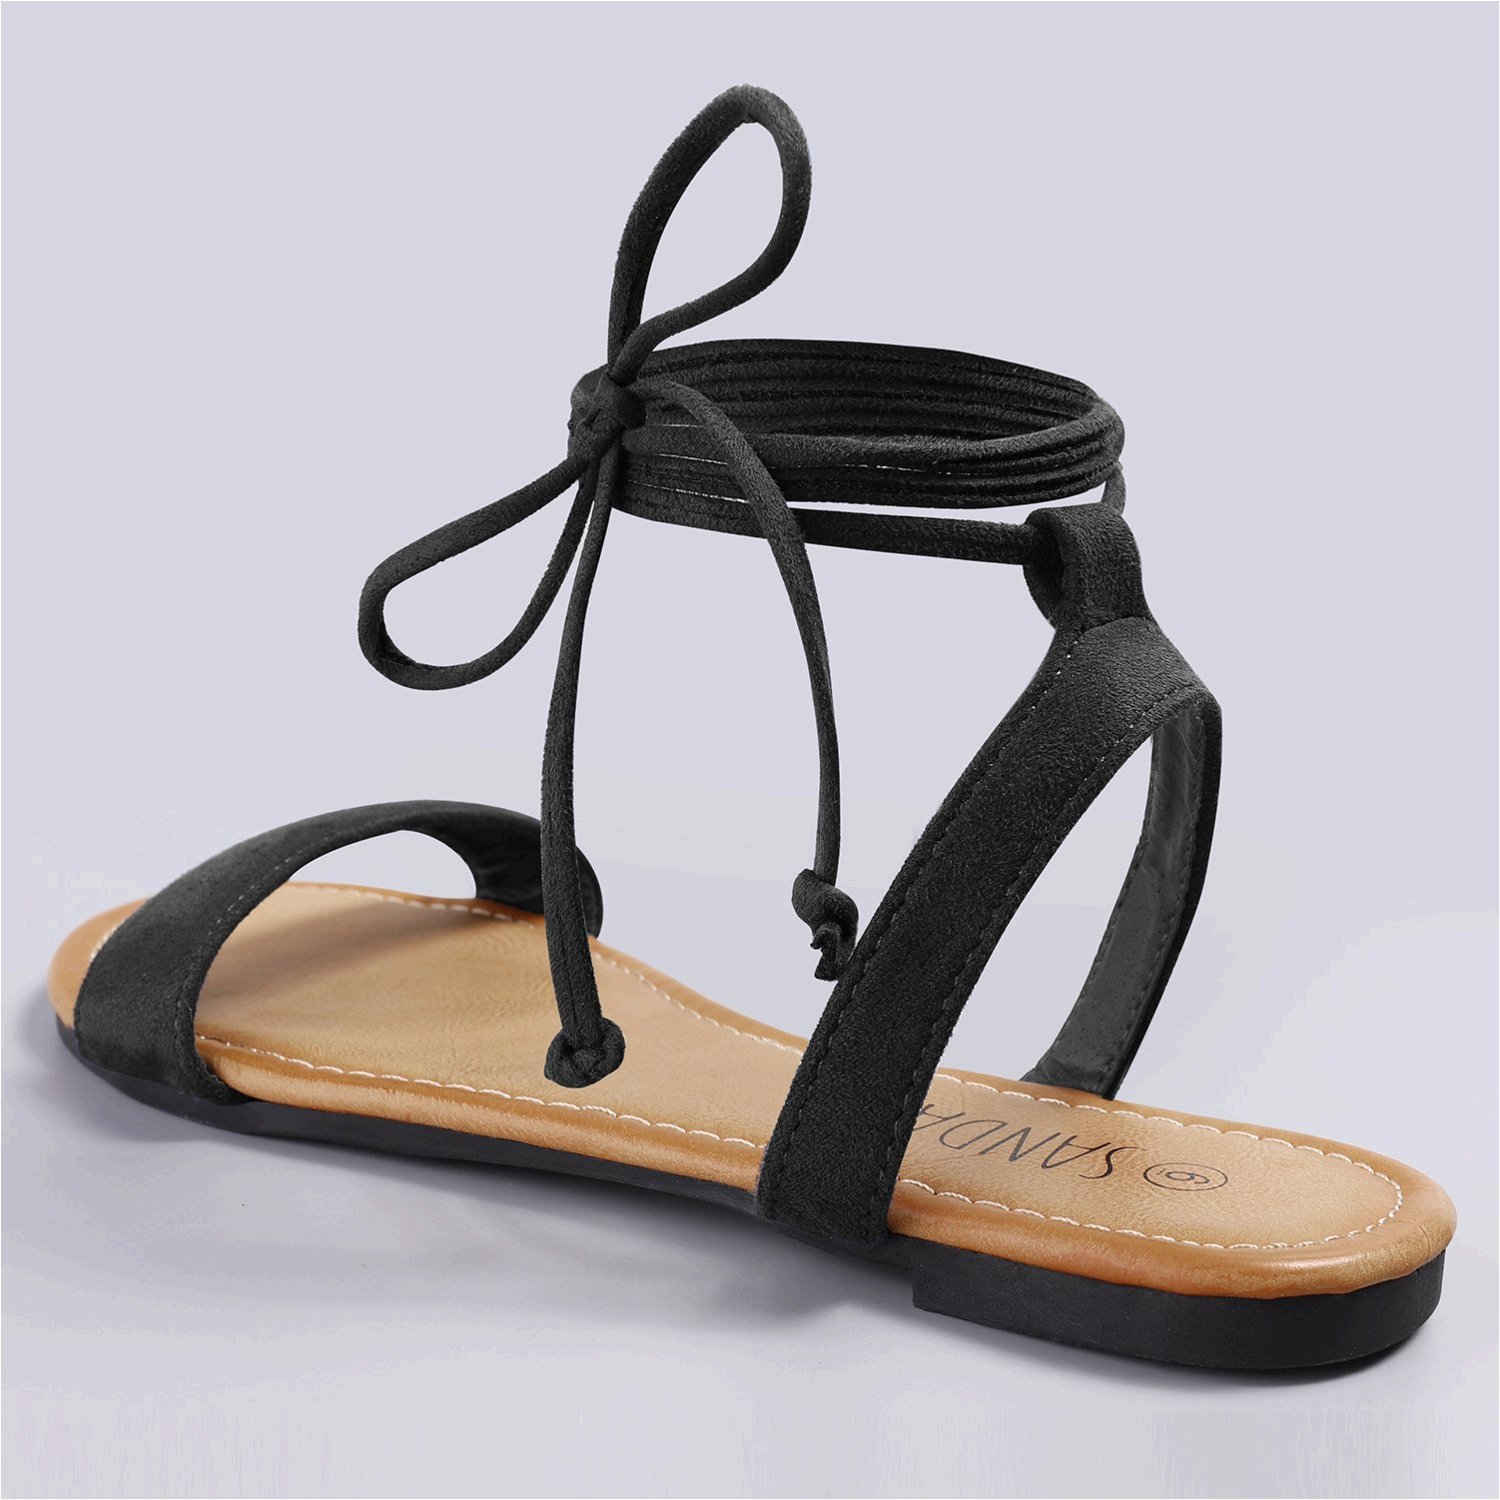 SANDALUP Tie Up Ankle Strap Flat Sandals for Women, New Black, Size 5.0 ...